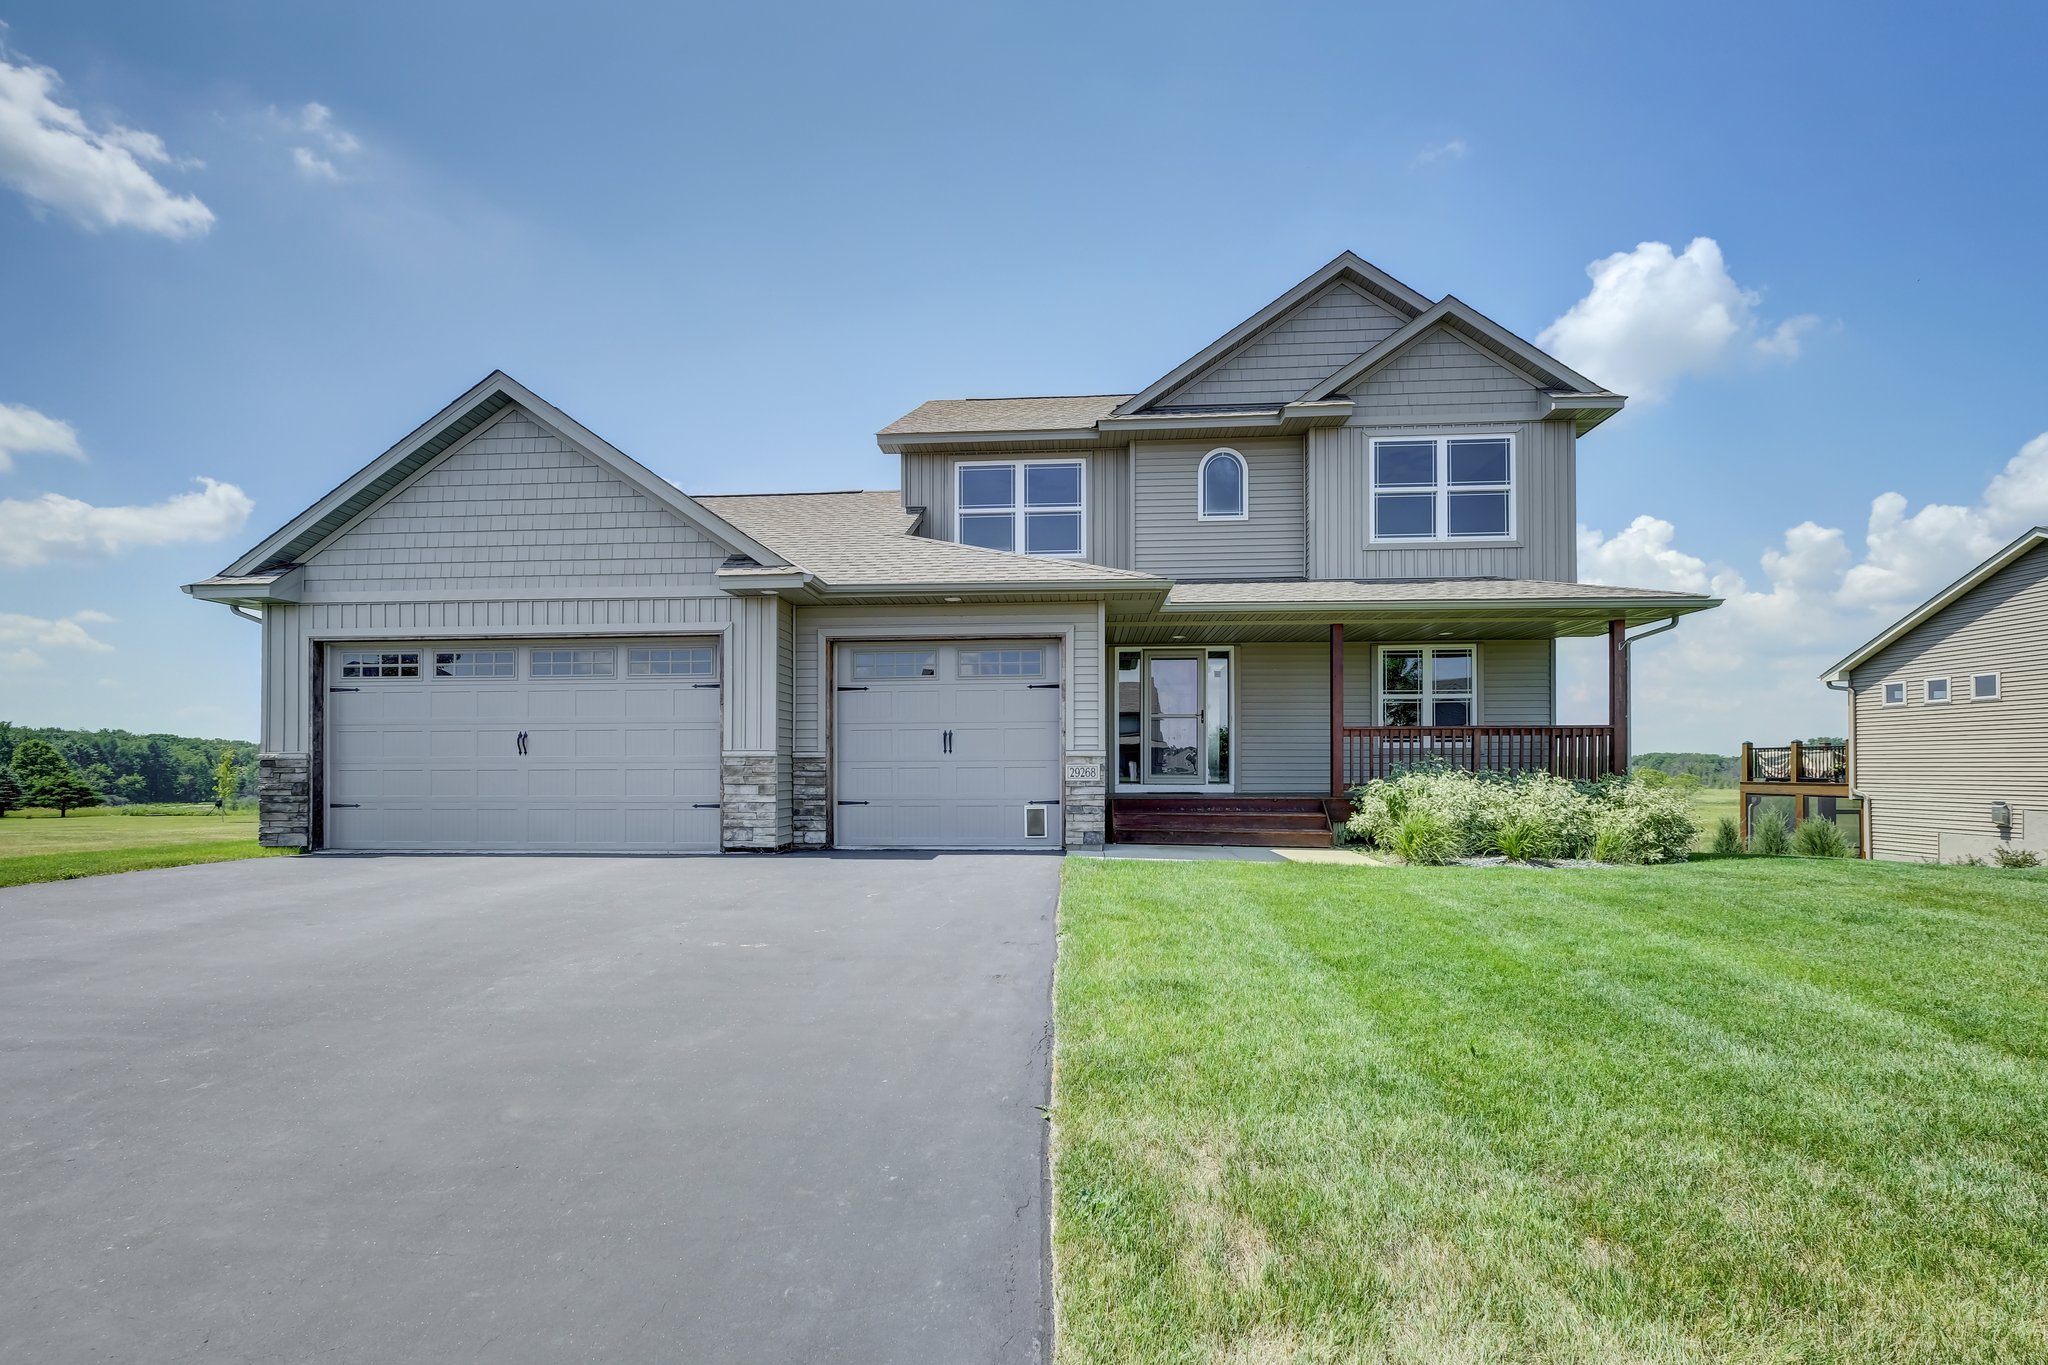  29268 Scenic Dr, Chisago City, MN 55013, US